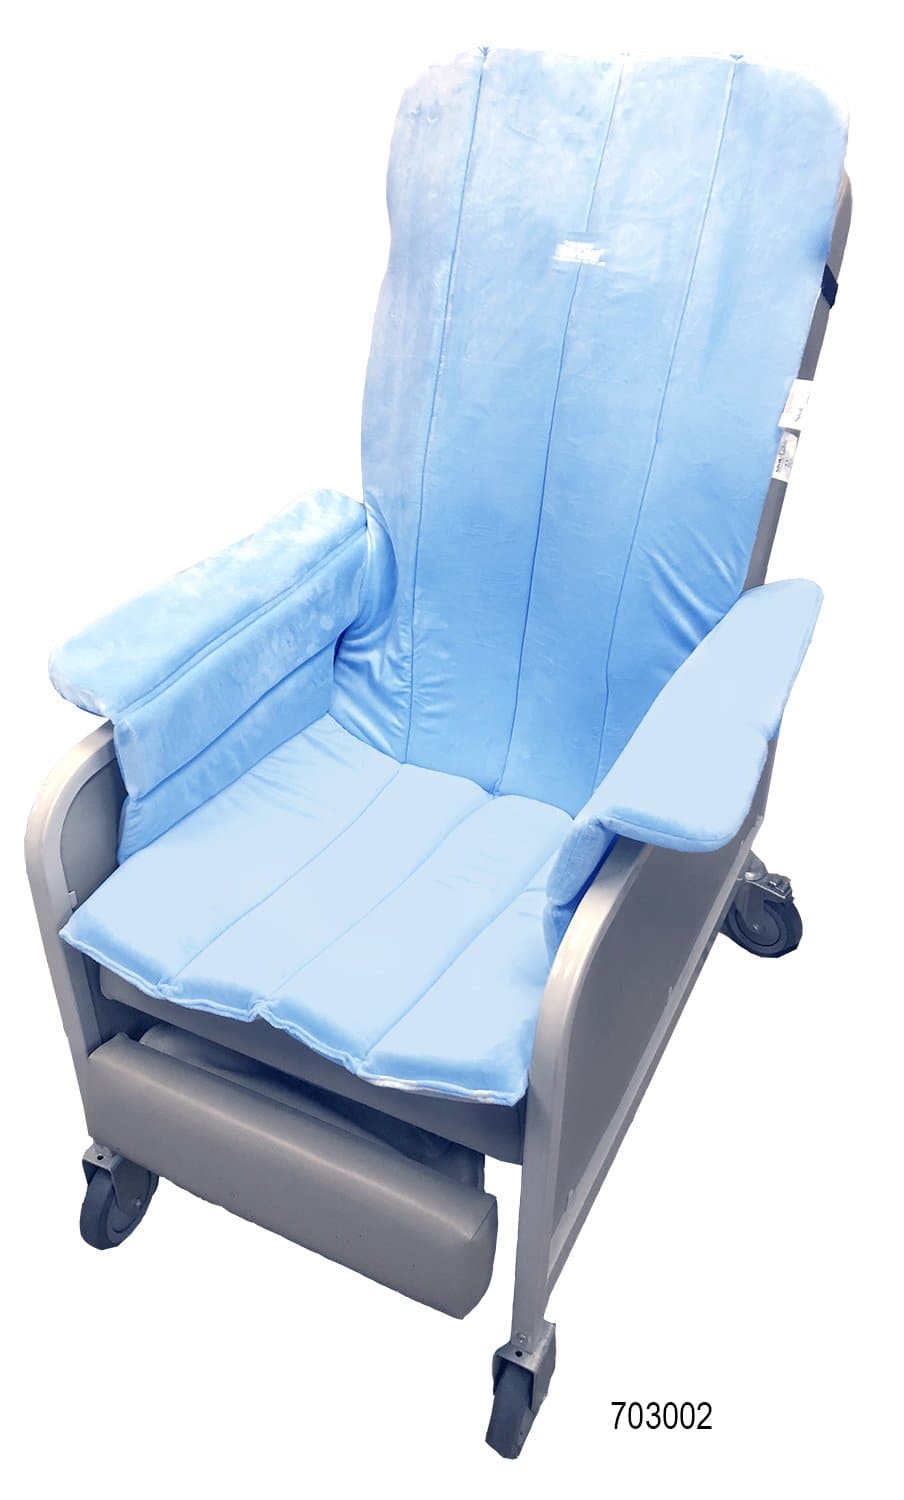 Skil-Care Geri-Chair Cozy Seat - Comfortable Foam Washable Cover - Senior.com Chair Covers